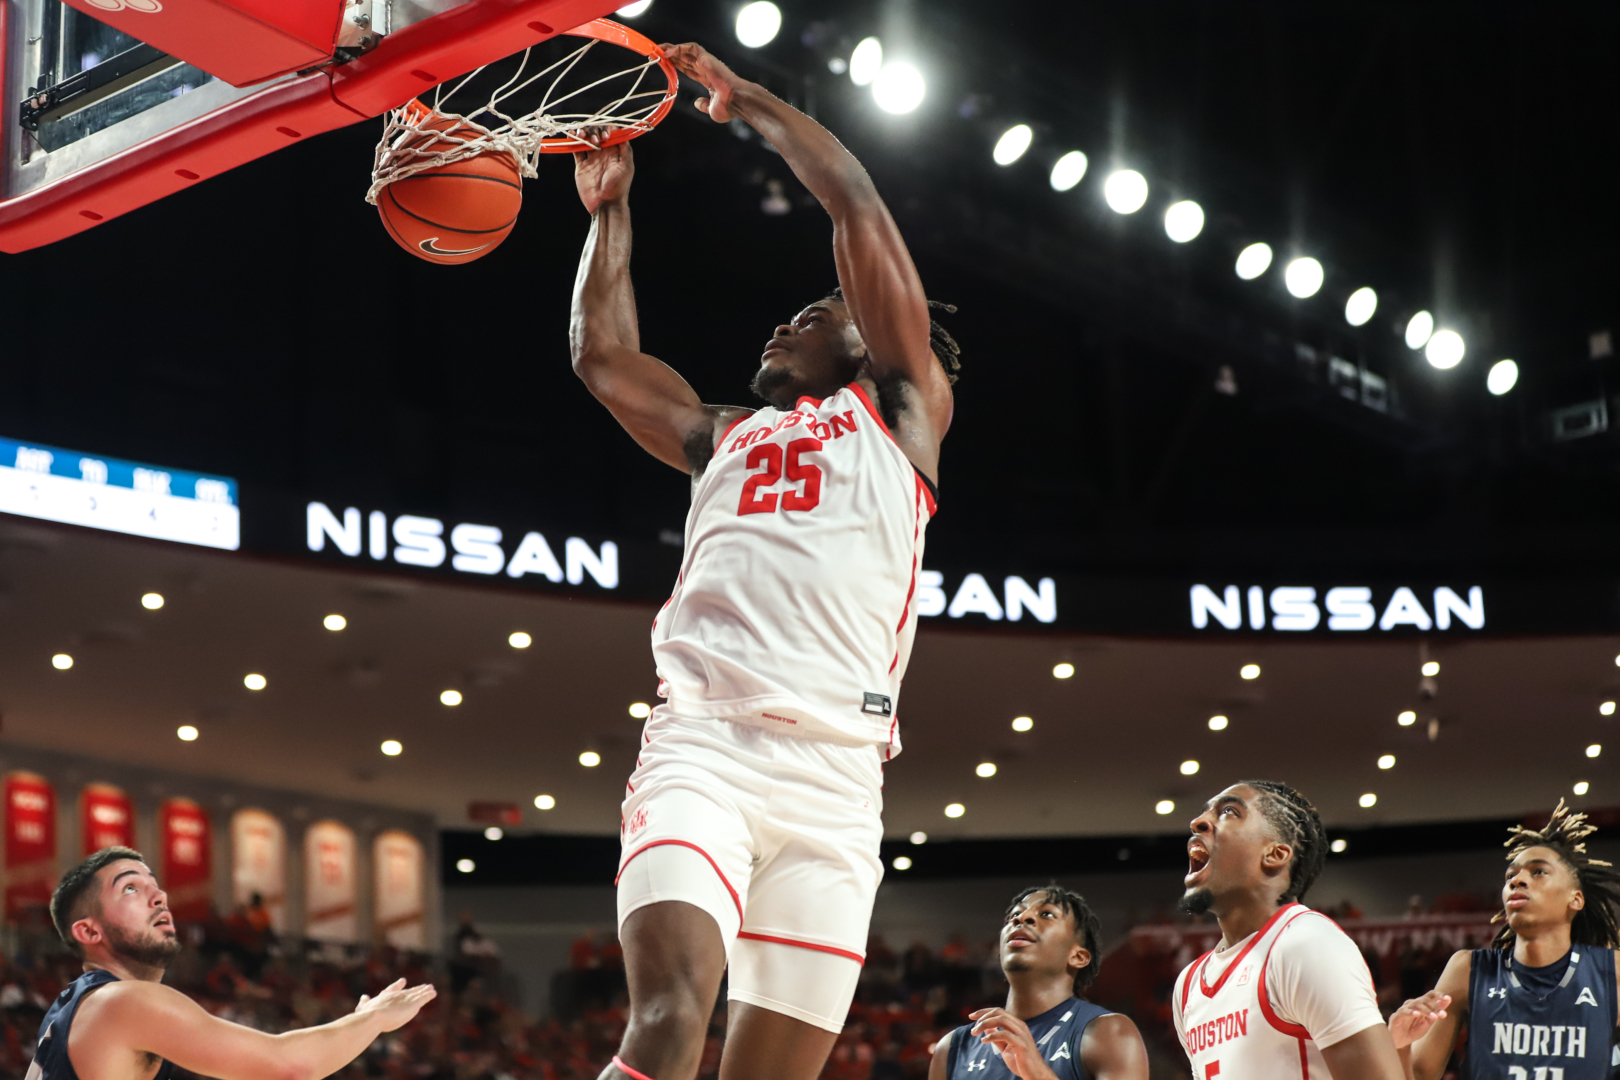 Freshman forward Jarace Walker throws down an emphatic two-handed slam in No. 1 UH's win over North Florida on Tuesday night. | Sean Thomas/The Cougar